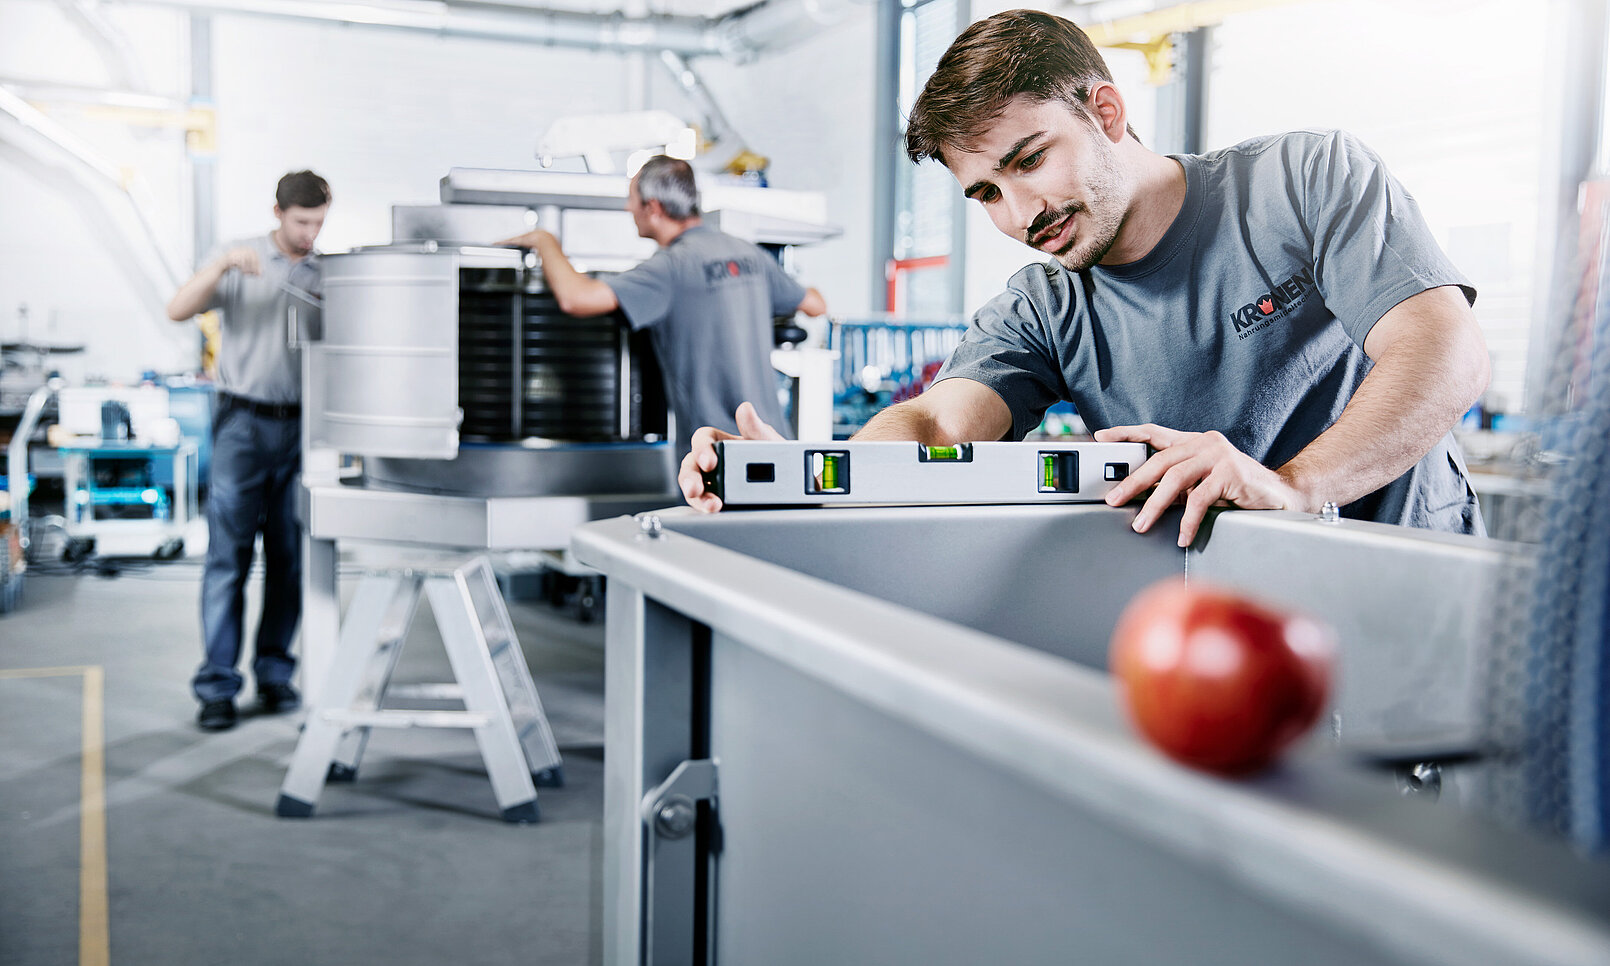 KRONEN – About us: As a family-run company with a highly qualified employees and more than 40 years of know-how in this  sector, we stand for innovative food technology – worldwide.